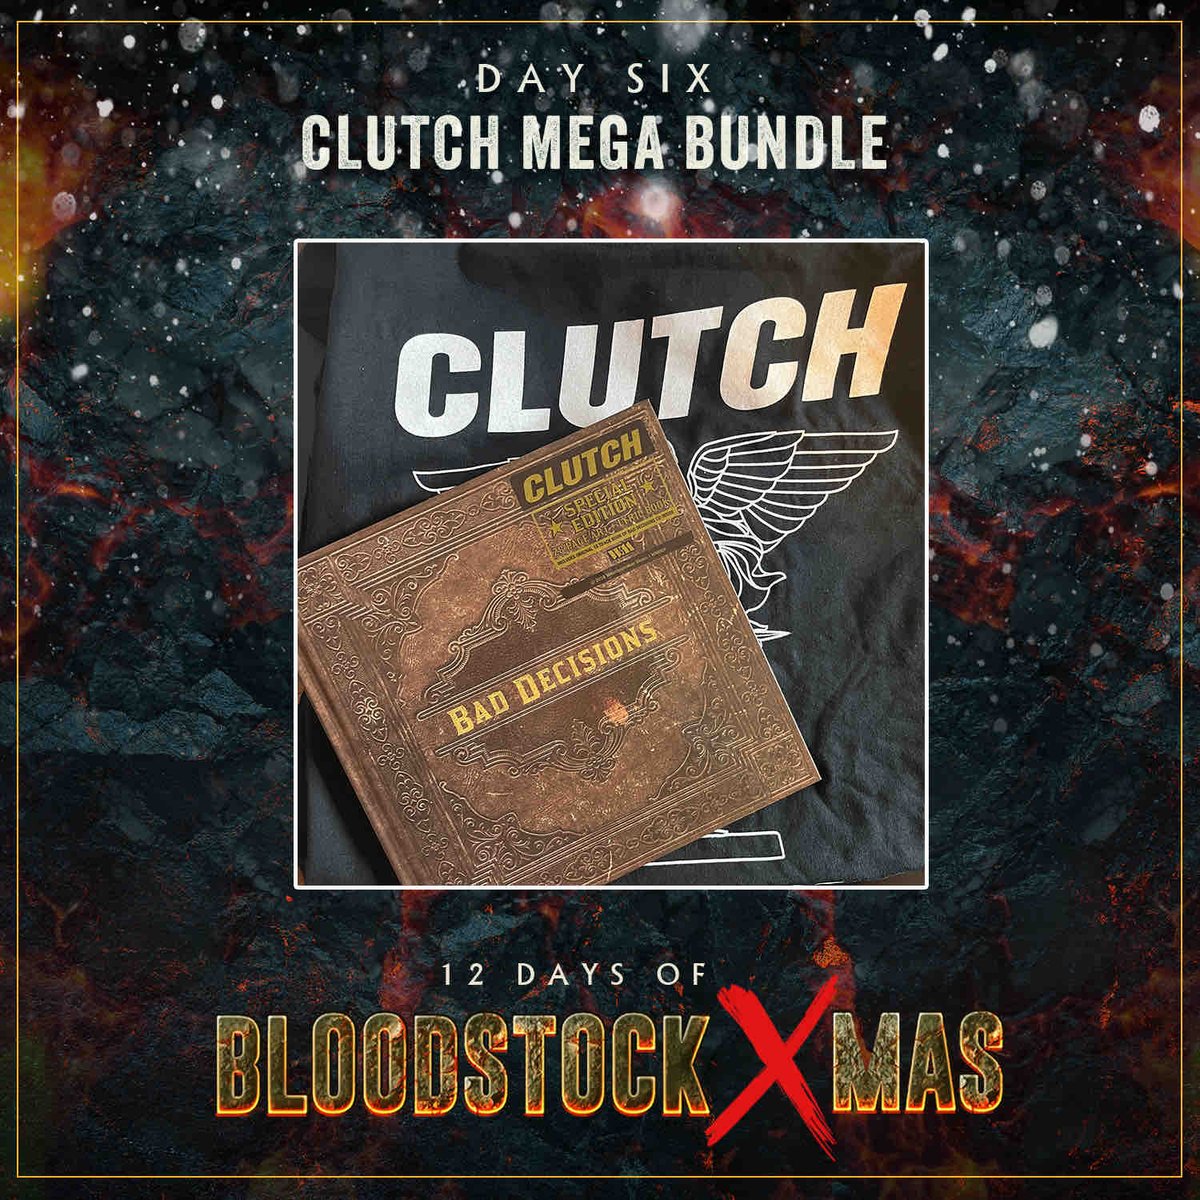 ON THE SIXTH DAY OF CHRISTMAS, BLOODSTOCK GAVE TO ME… A MEGA Clutch bundle: - Special edition Book Of Bad Decisions album - Clutch Psychic Warfare t-shirt - Neil Fallon will hand-write the lyrics to any Clutch song of your choice! Head over to our Insta or Facebook to enter!